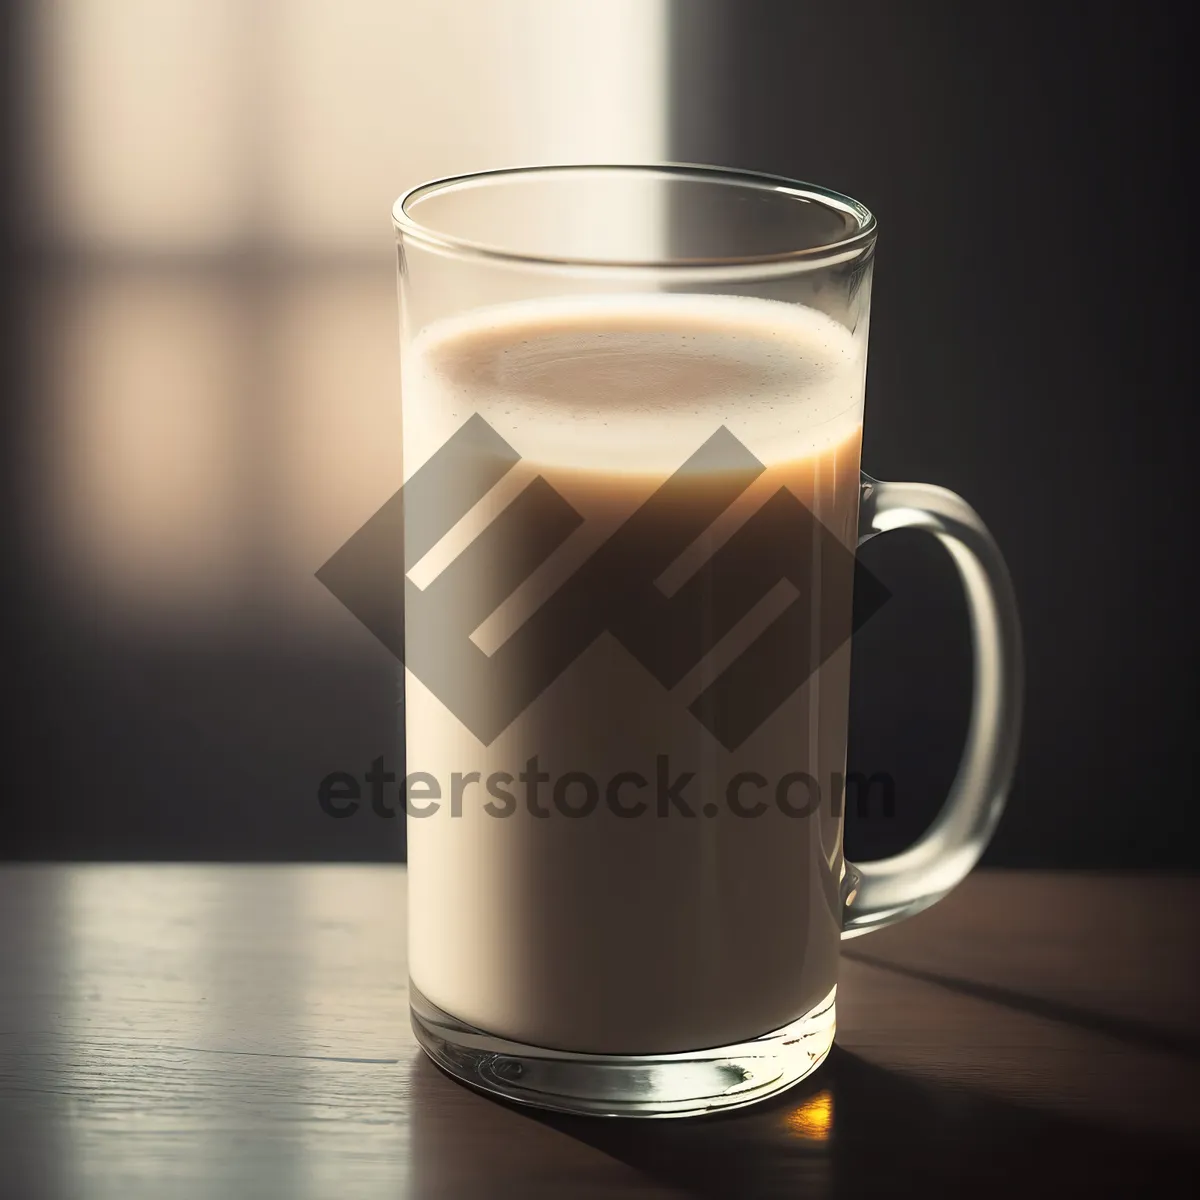 Picture of Espresso Mug with frothy coffee goodness